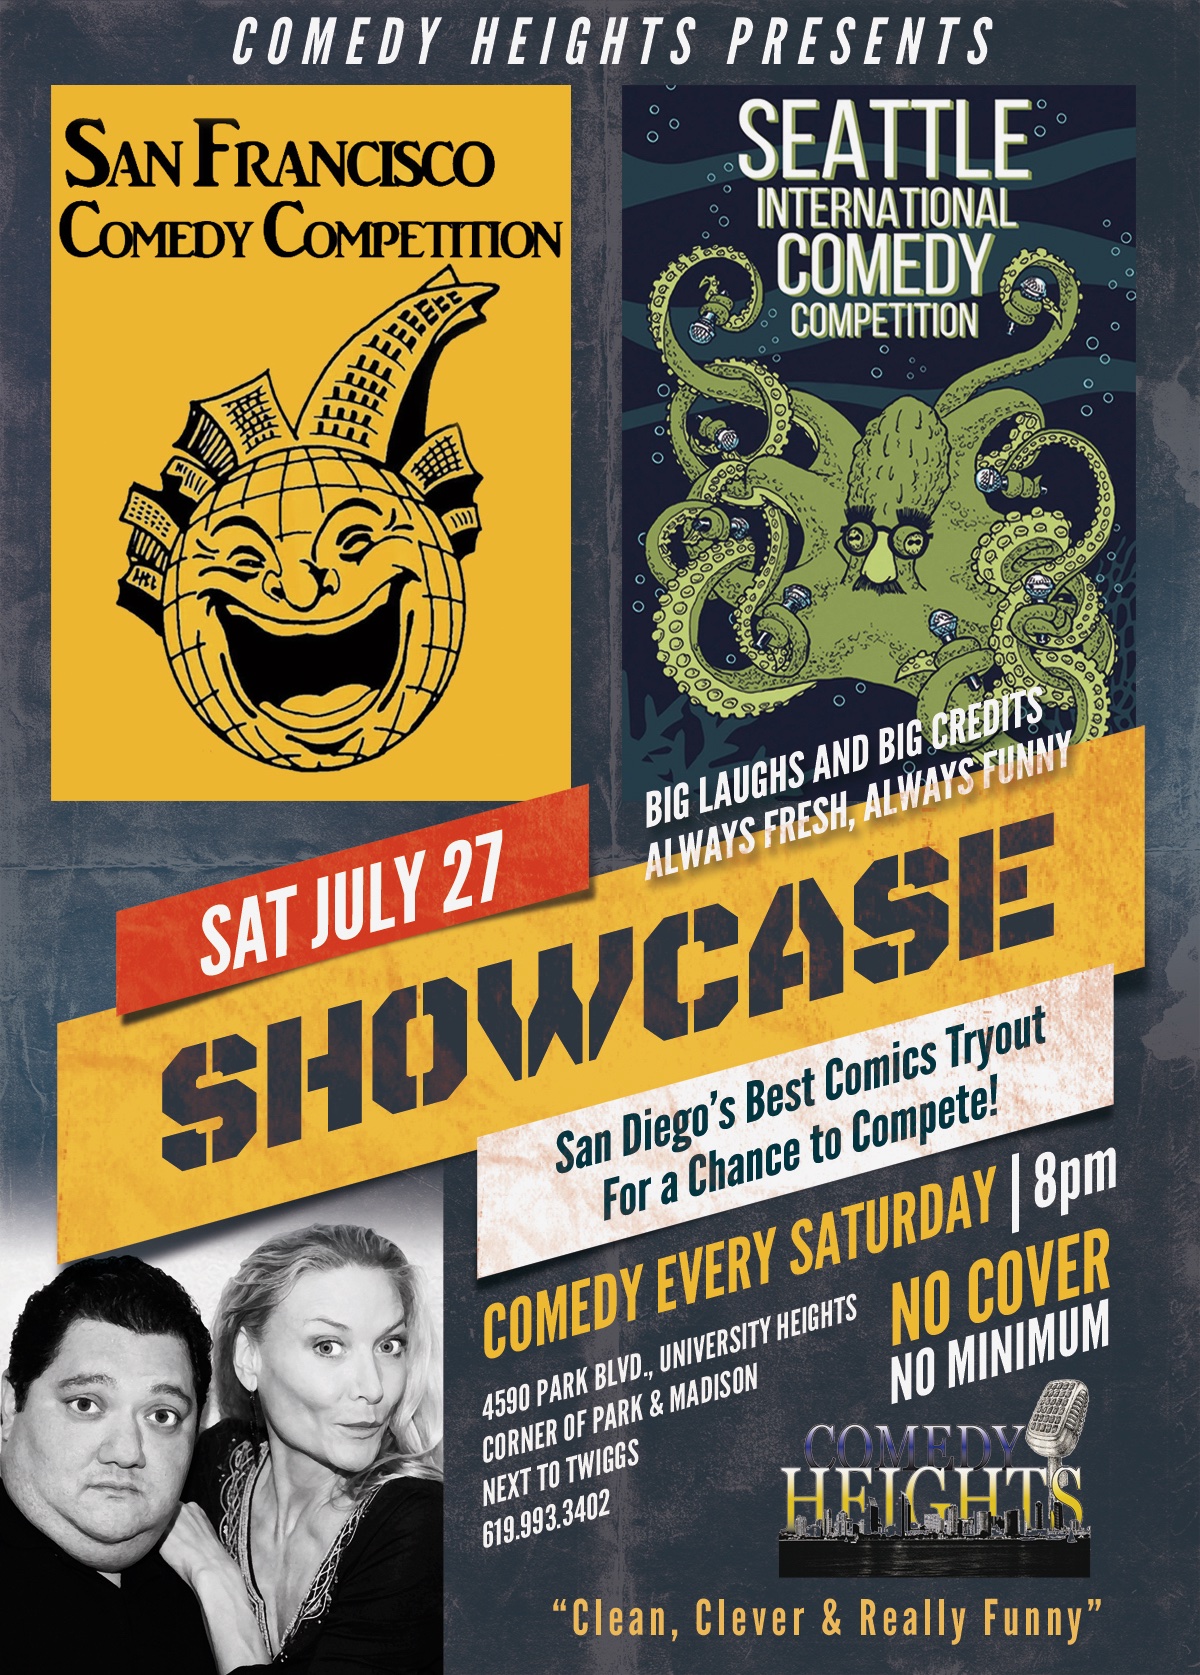 Comedy Heights showcase for 2 International Contests LAST SATURDAY